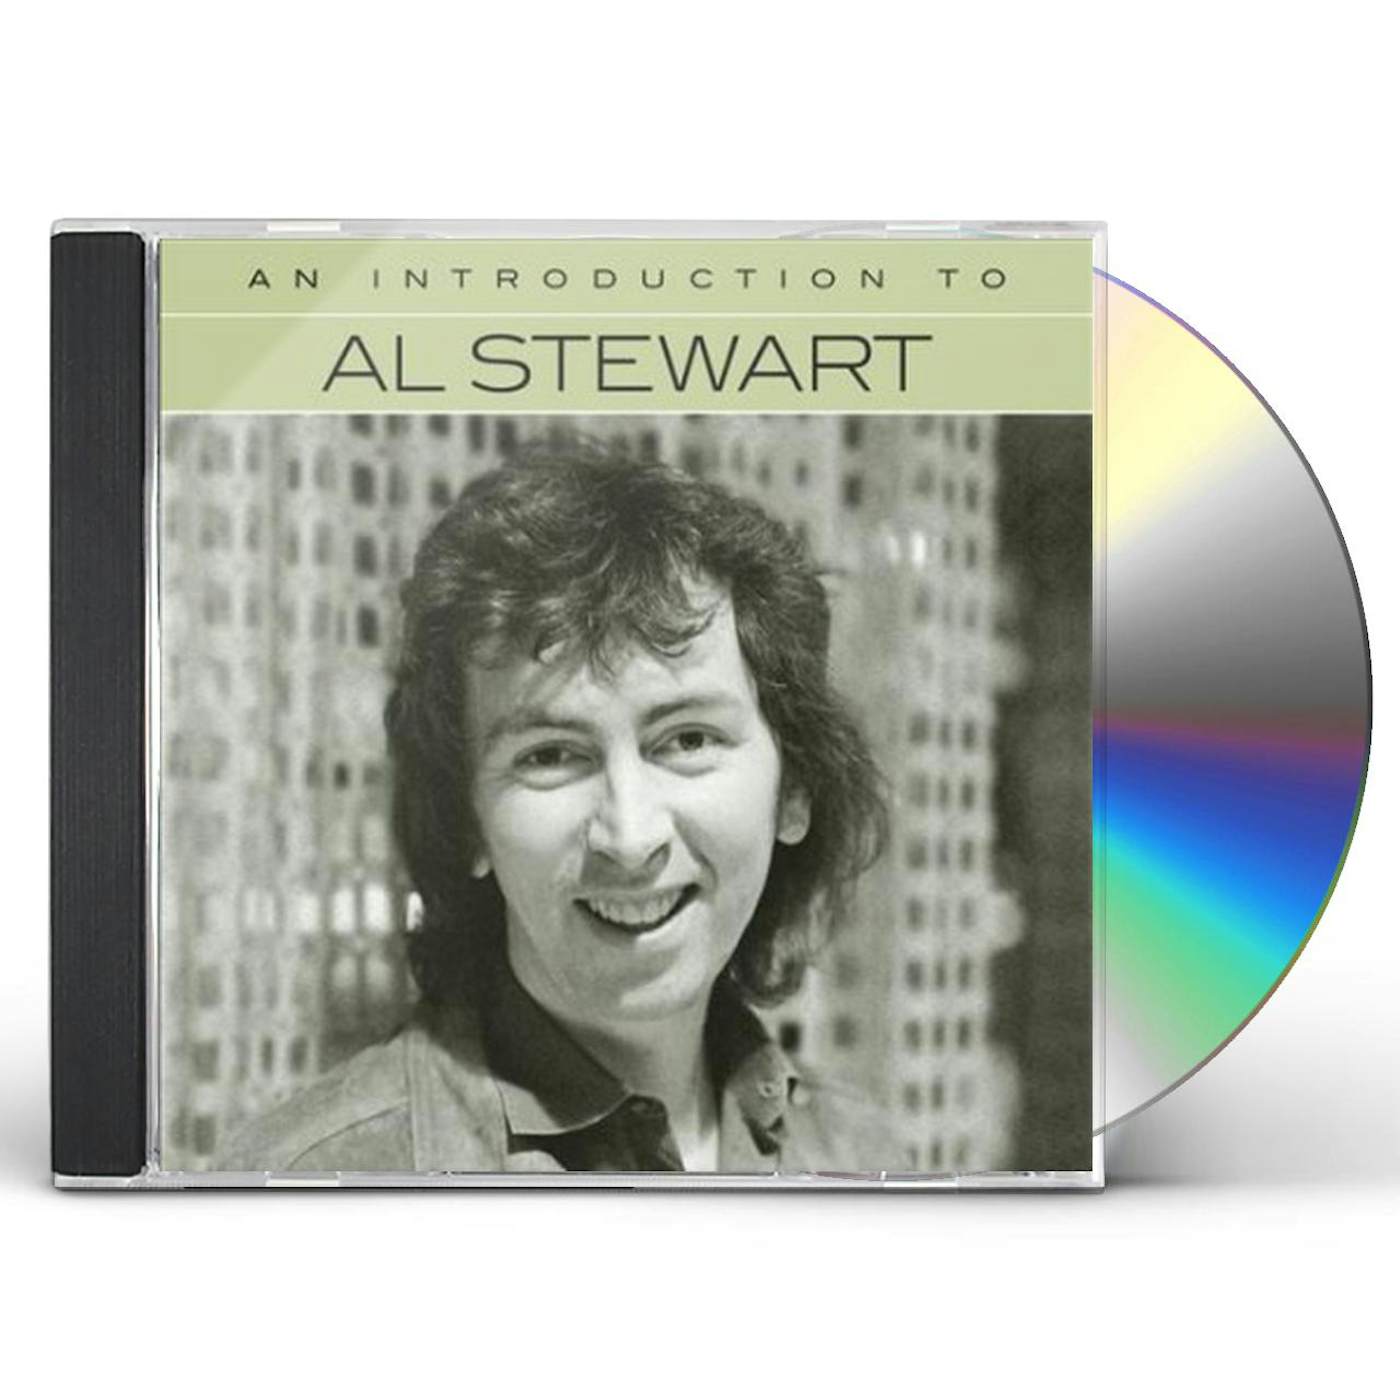 Al Stewart AN INTRODUCTION TO CD